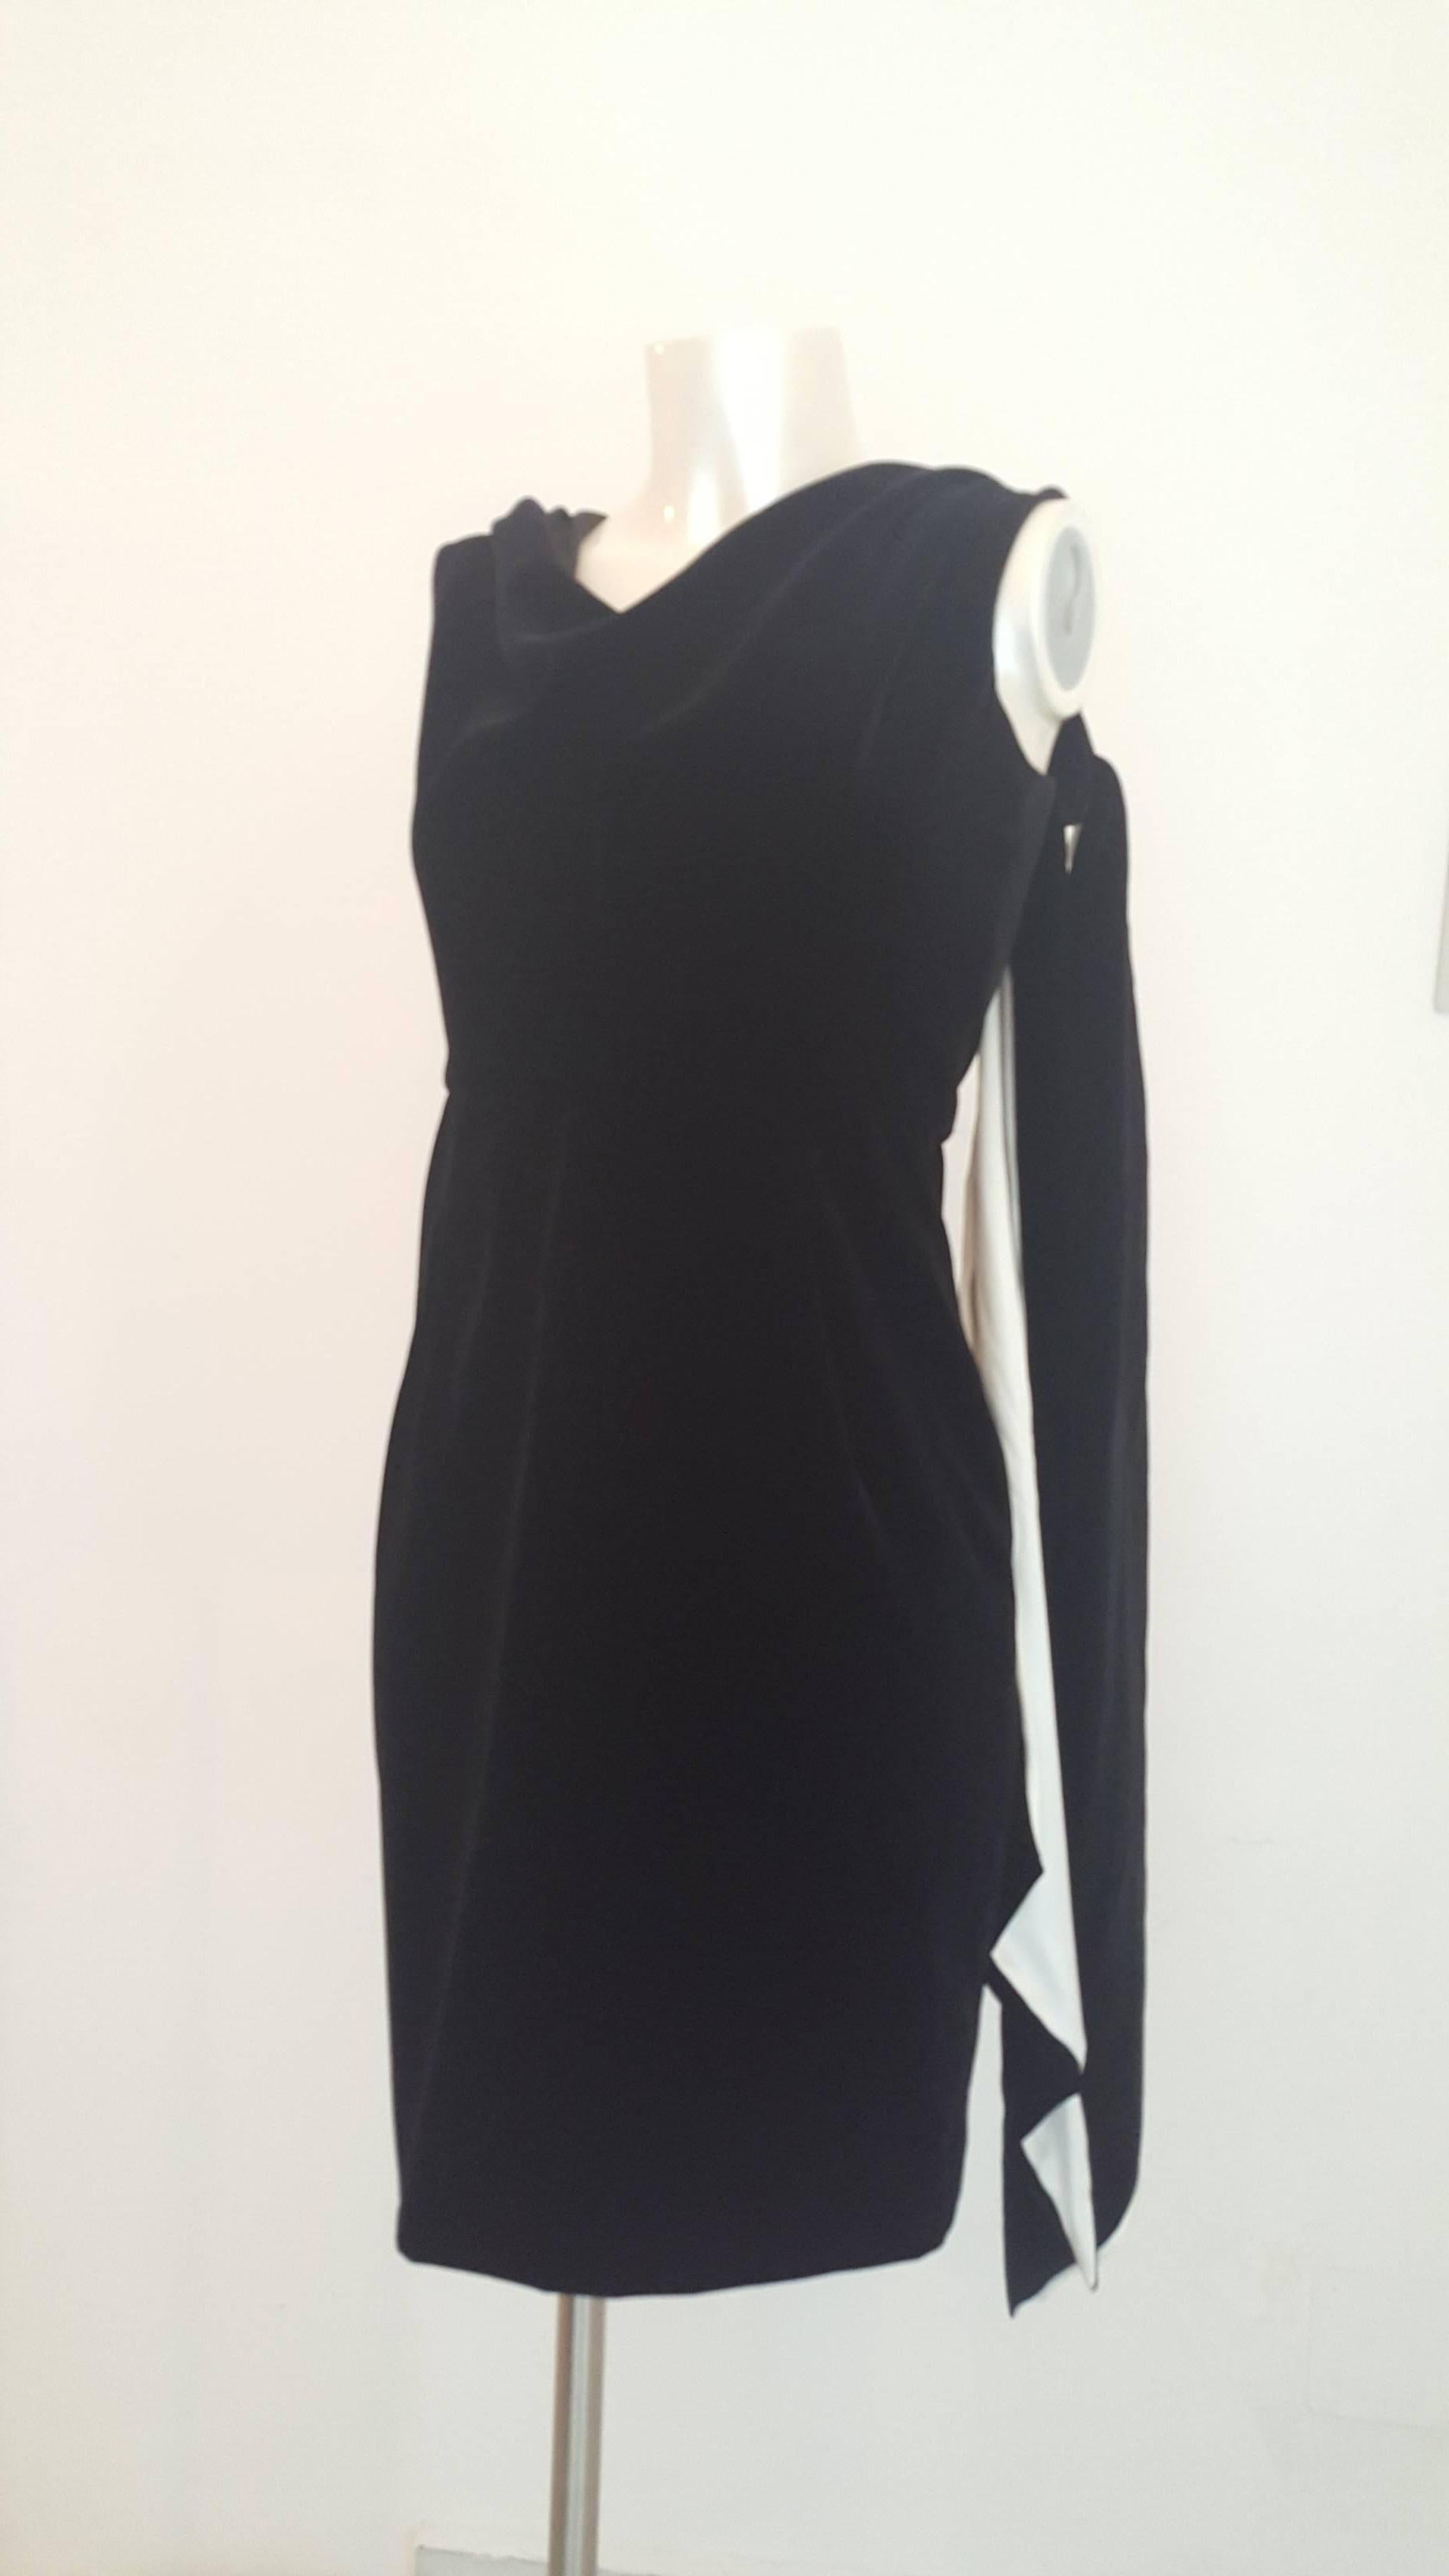 2000s Yves Saint Laurent black and white velvet dress NWOT in size range 38. This amazing dress is still with tags totally made in france.
composition: 98 cotton 2 elastane
original price was 1870.00€